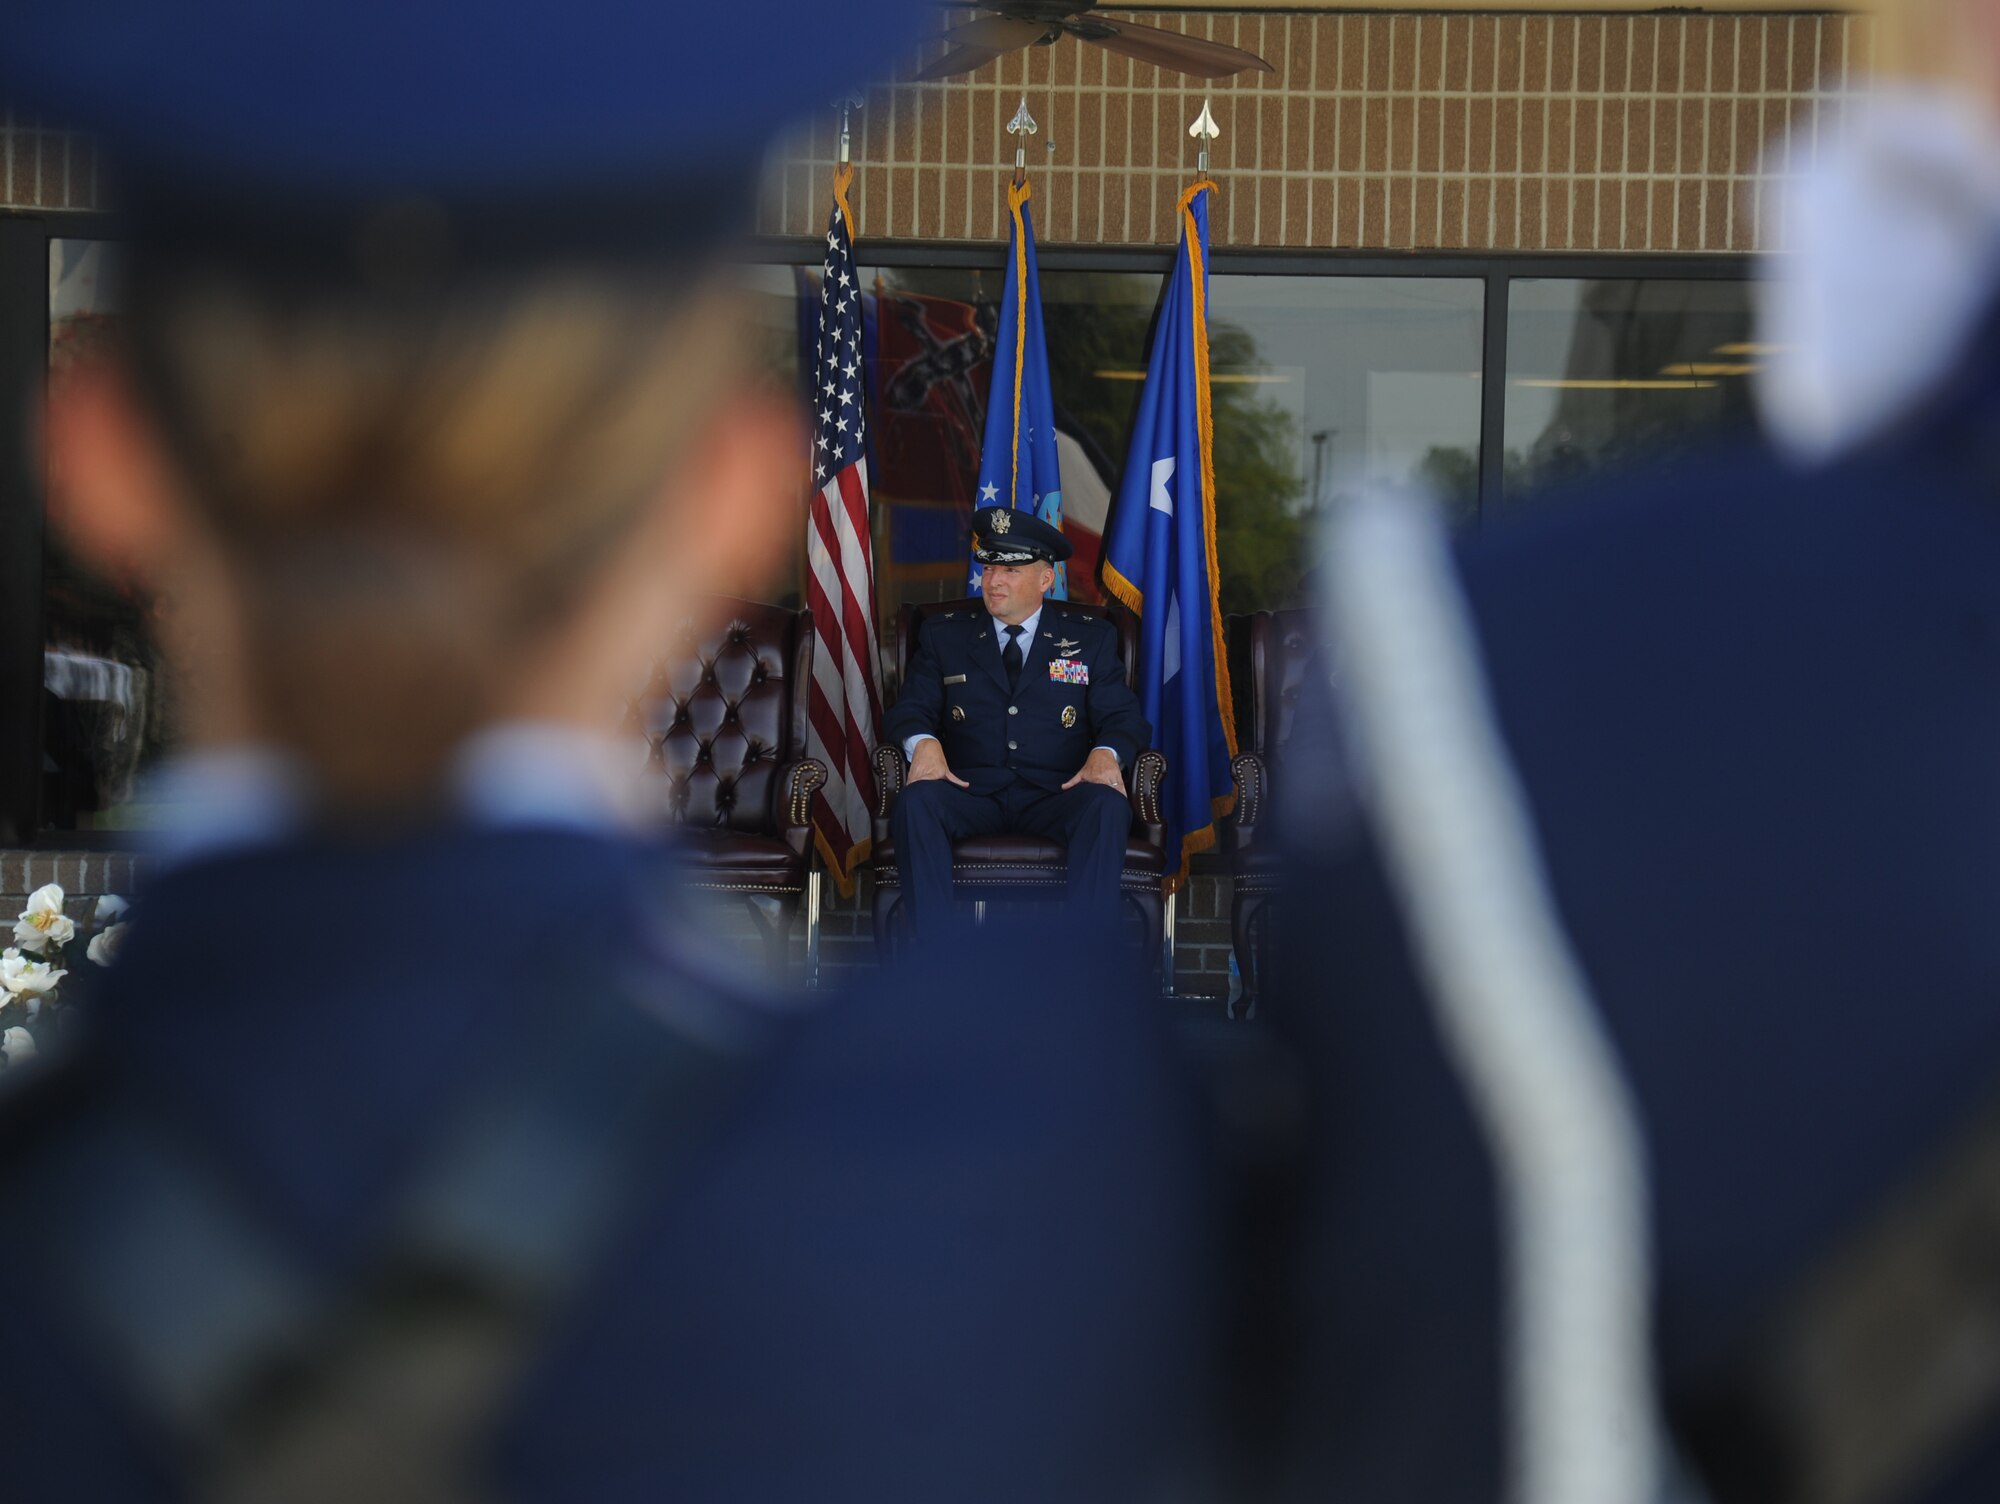 Brig. Gen. Patrick Higby, outgoing 81st Training Wing commander, listens as Col. Michele Edmondson gives her first speech as 81st TRW commander during a change of command, June 26, 2015, Keesler Air Force Base, Miss. Edmondson took command of the 81st TRW from Higby. (U.S. Air Force photo by Senior Airman Holly Mansfield)